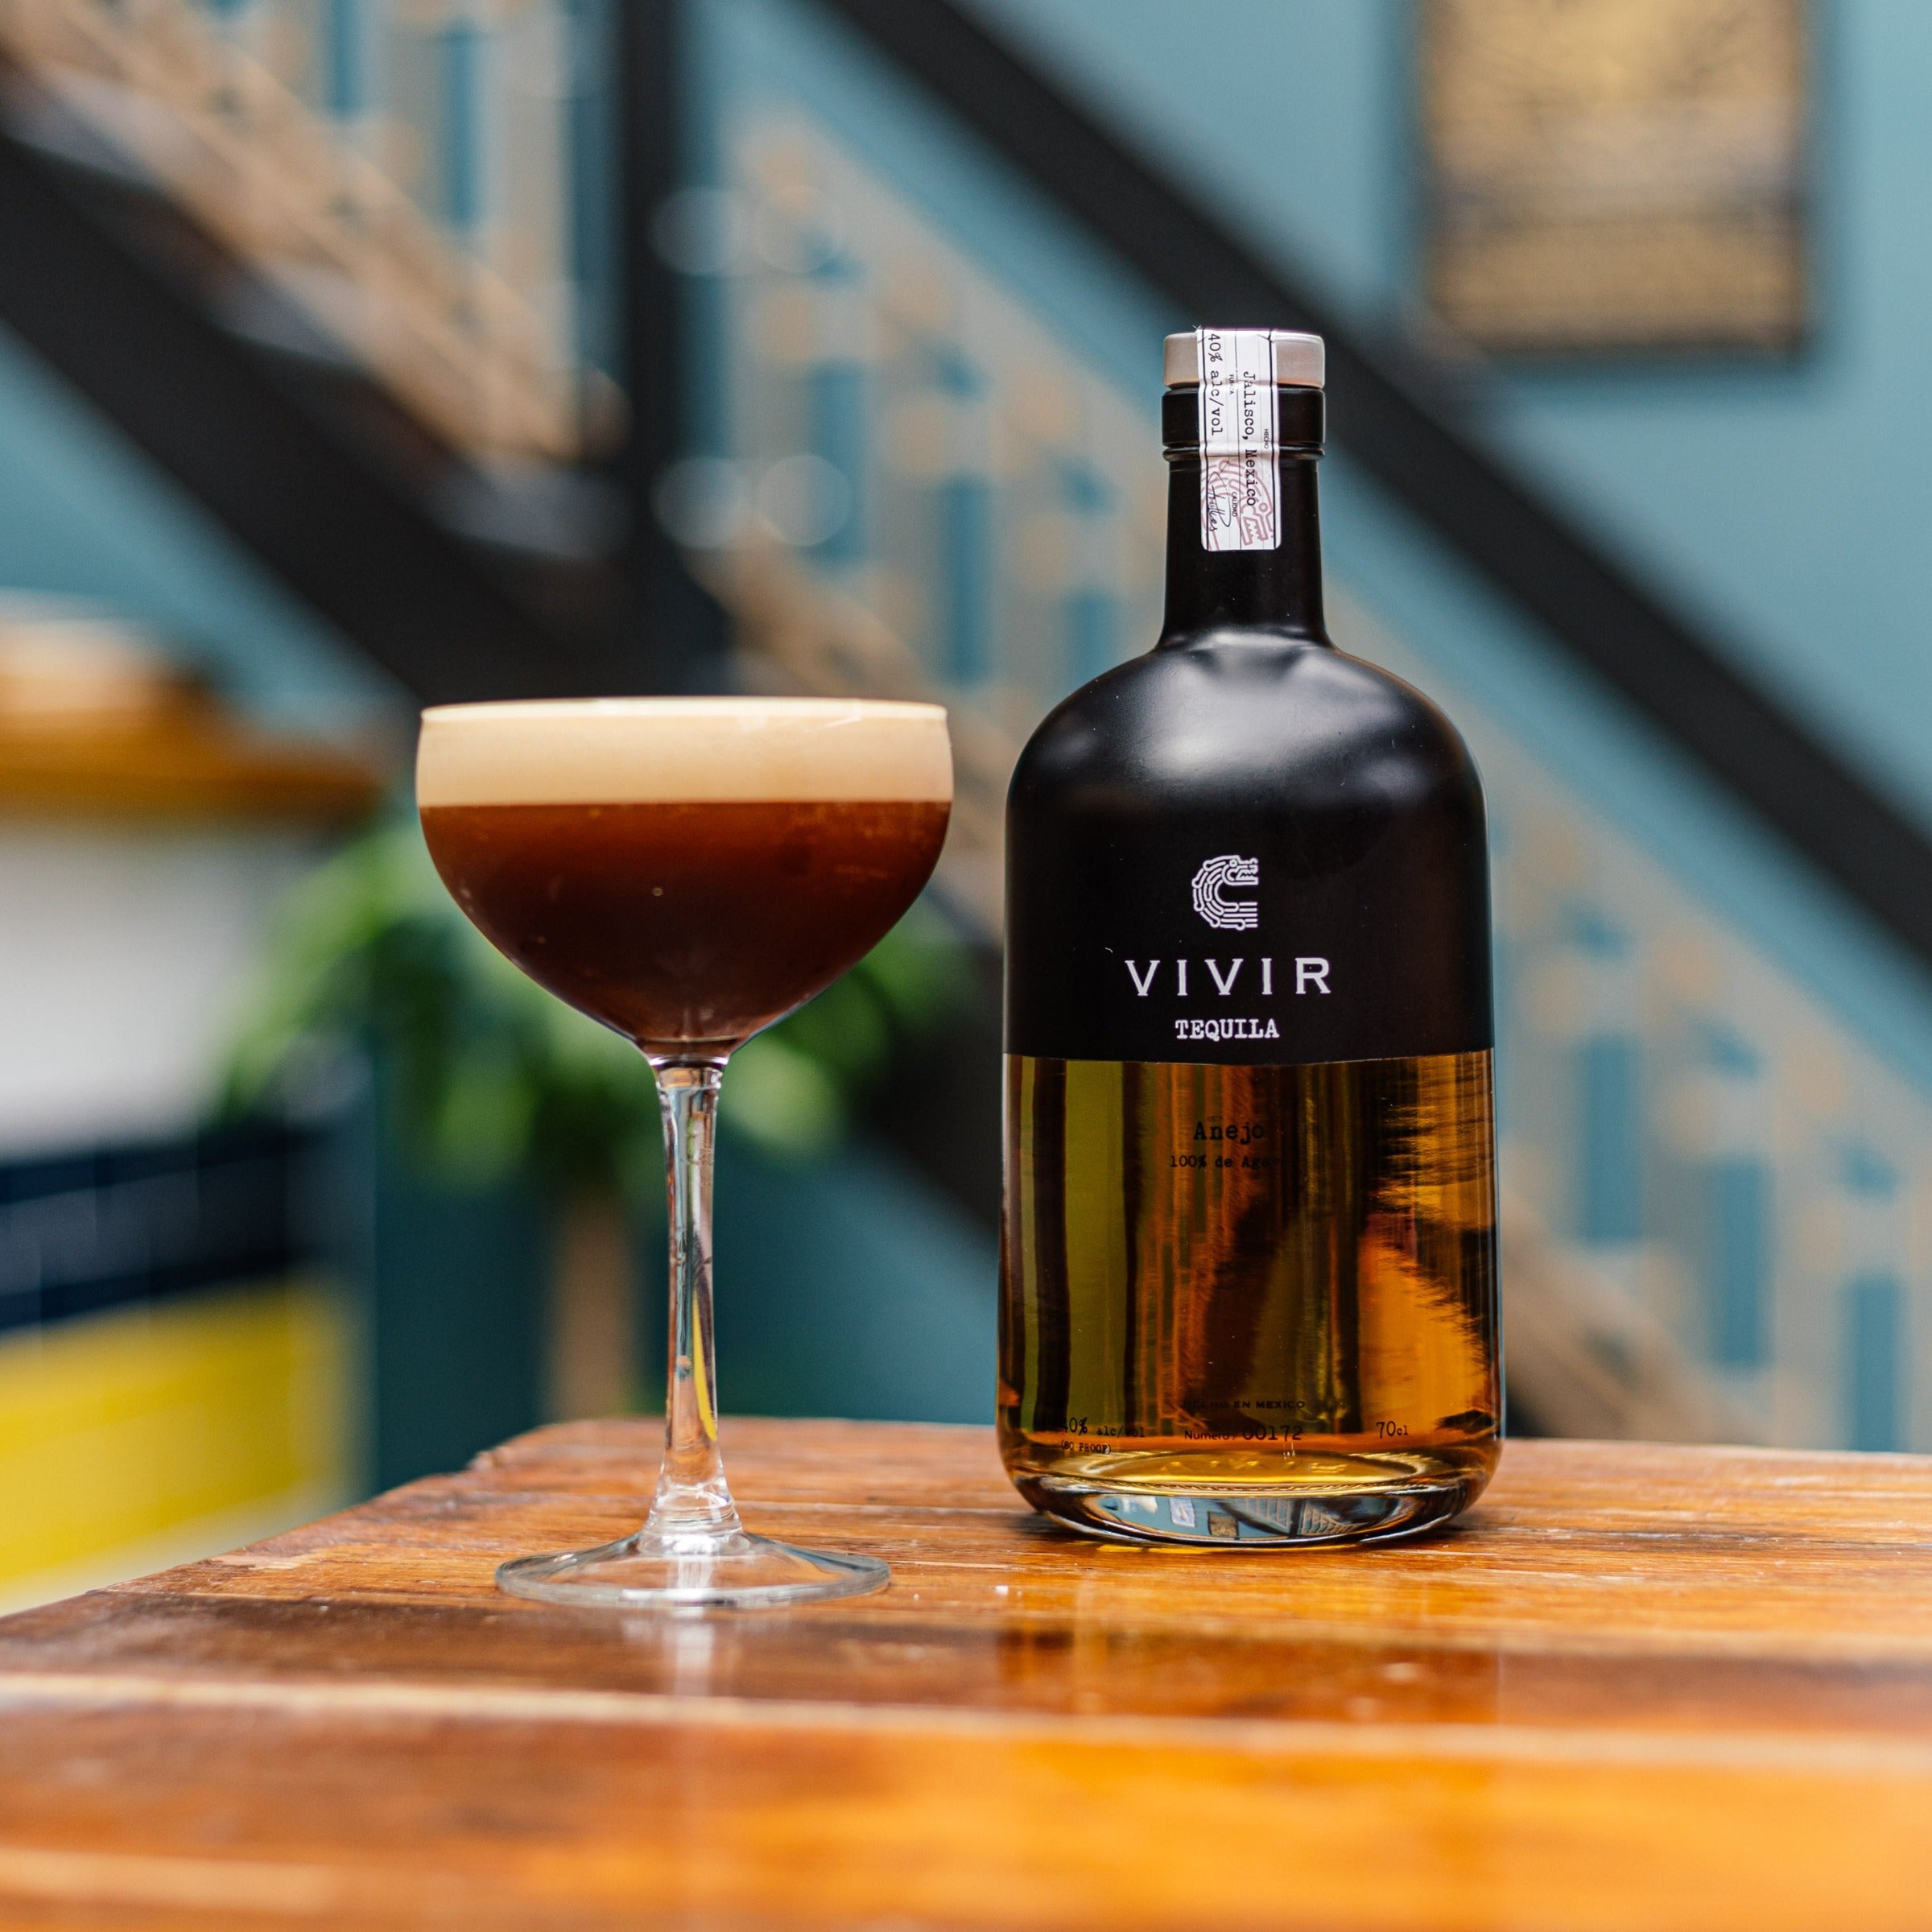 A bottle of VIVIR Tequila Anejo is positioned next to an Espresso Martini cocktail.